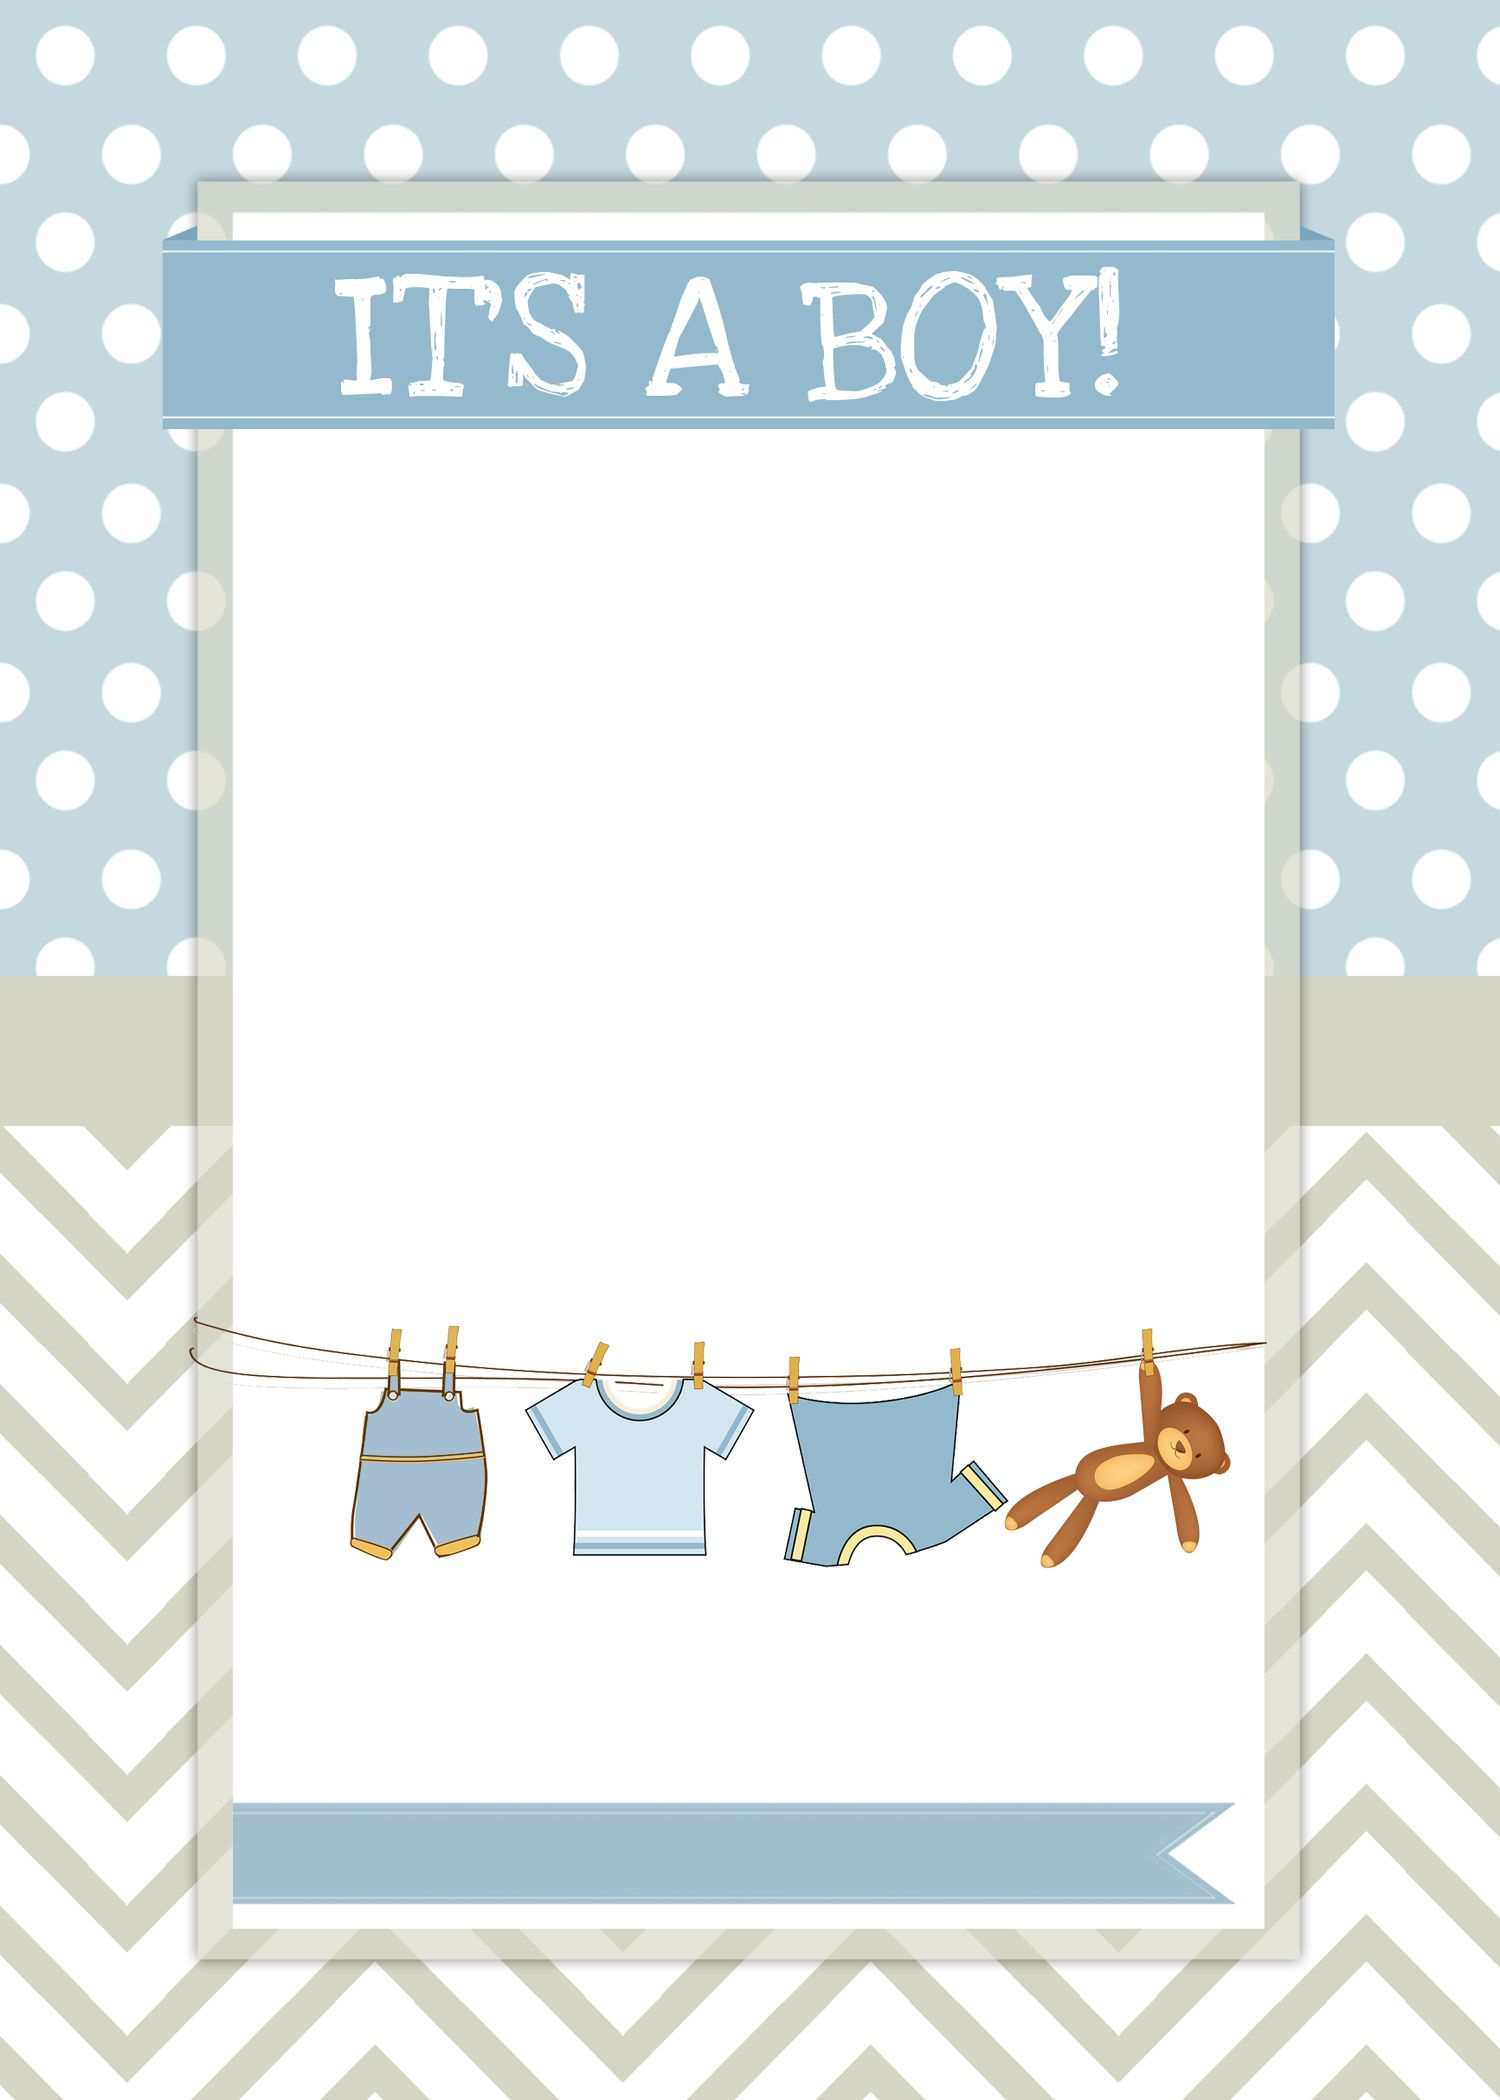 Boy Baby Shower Free Printables | Ideas For The House | Pinterest - Free Printable Baby Shower Invitations Templates For Boys